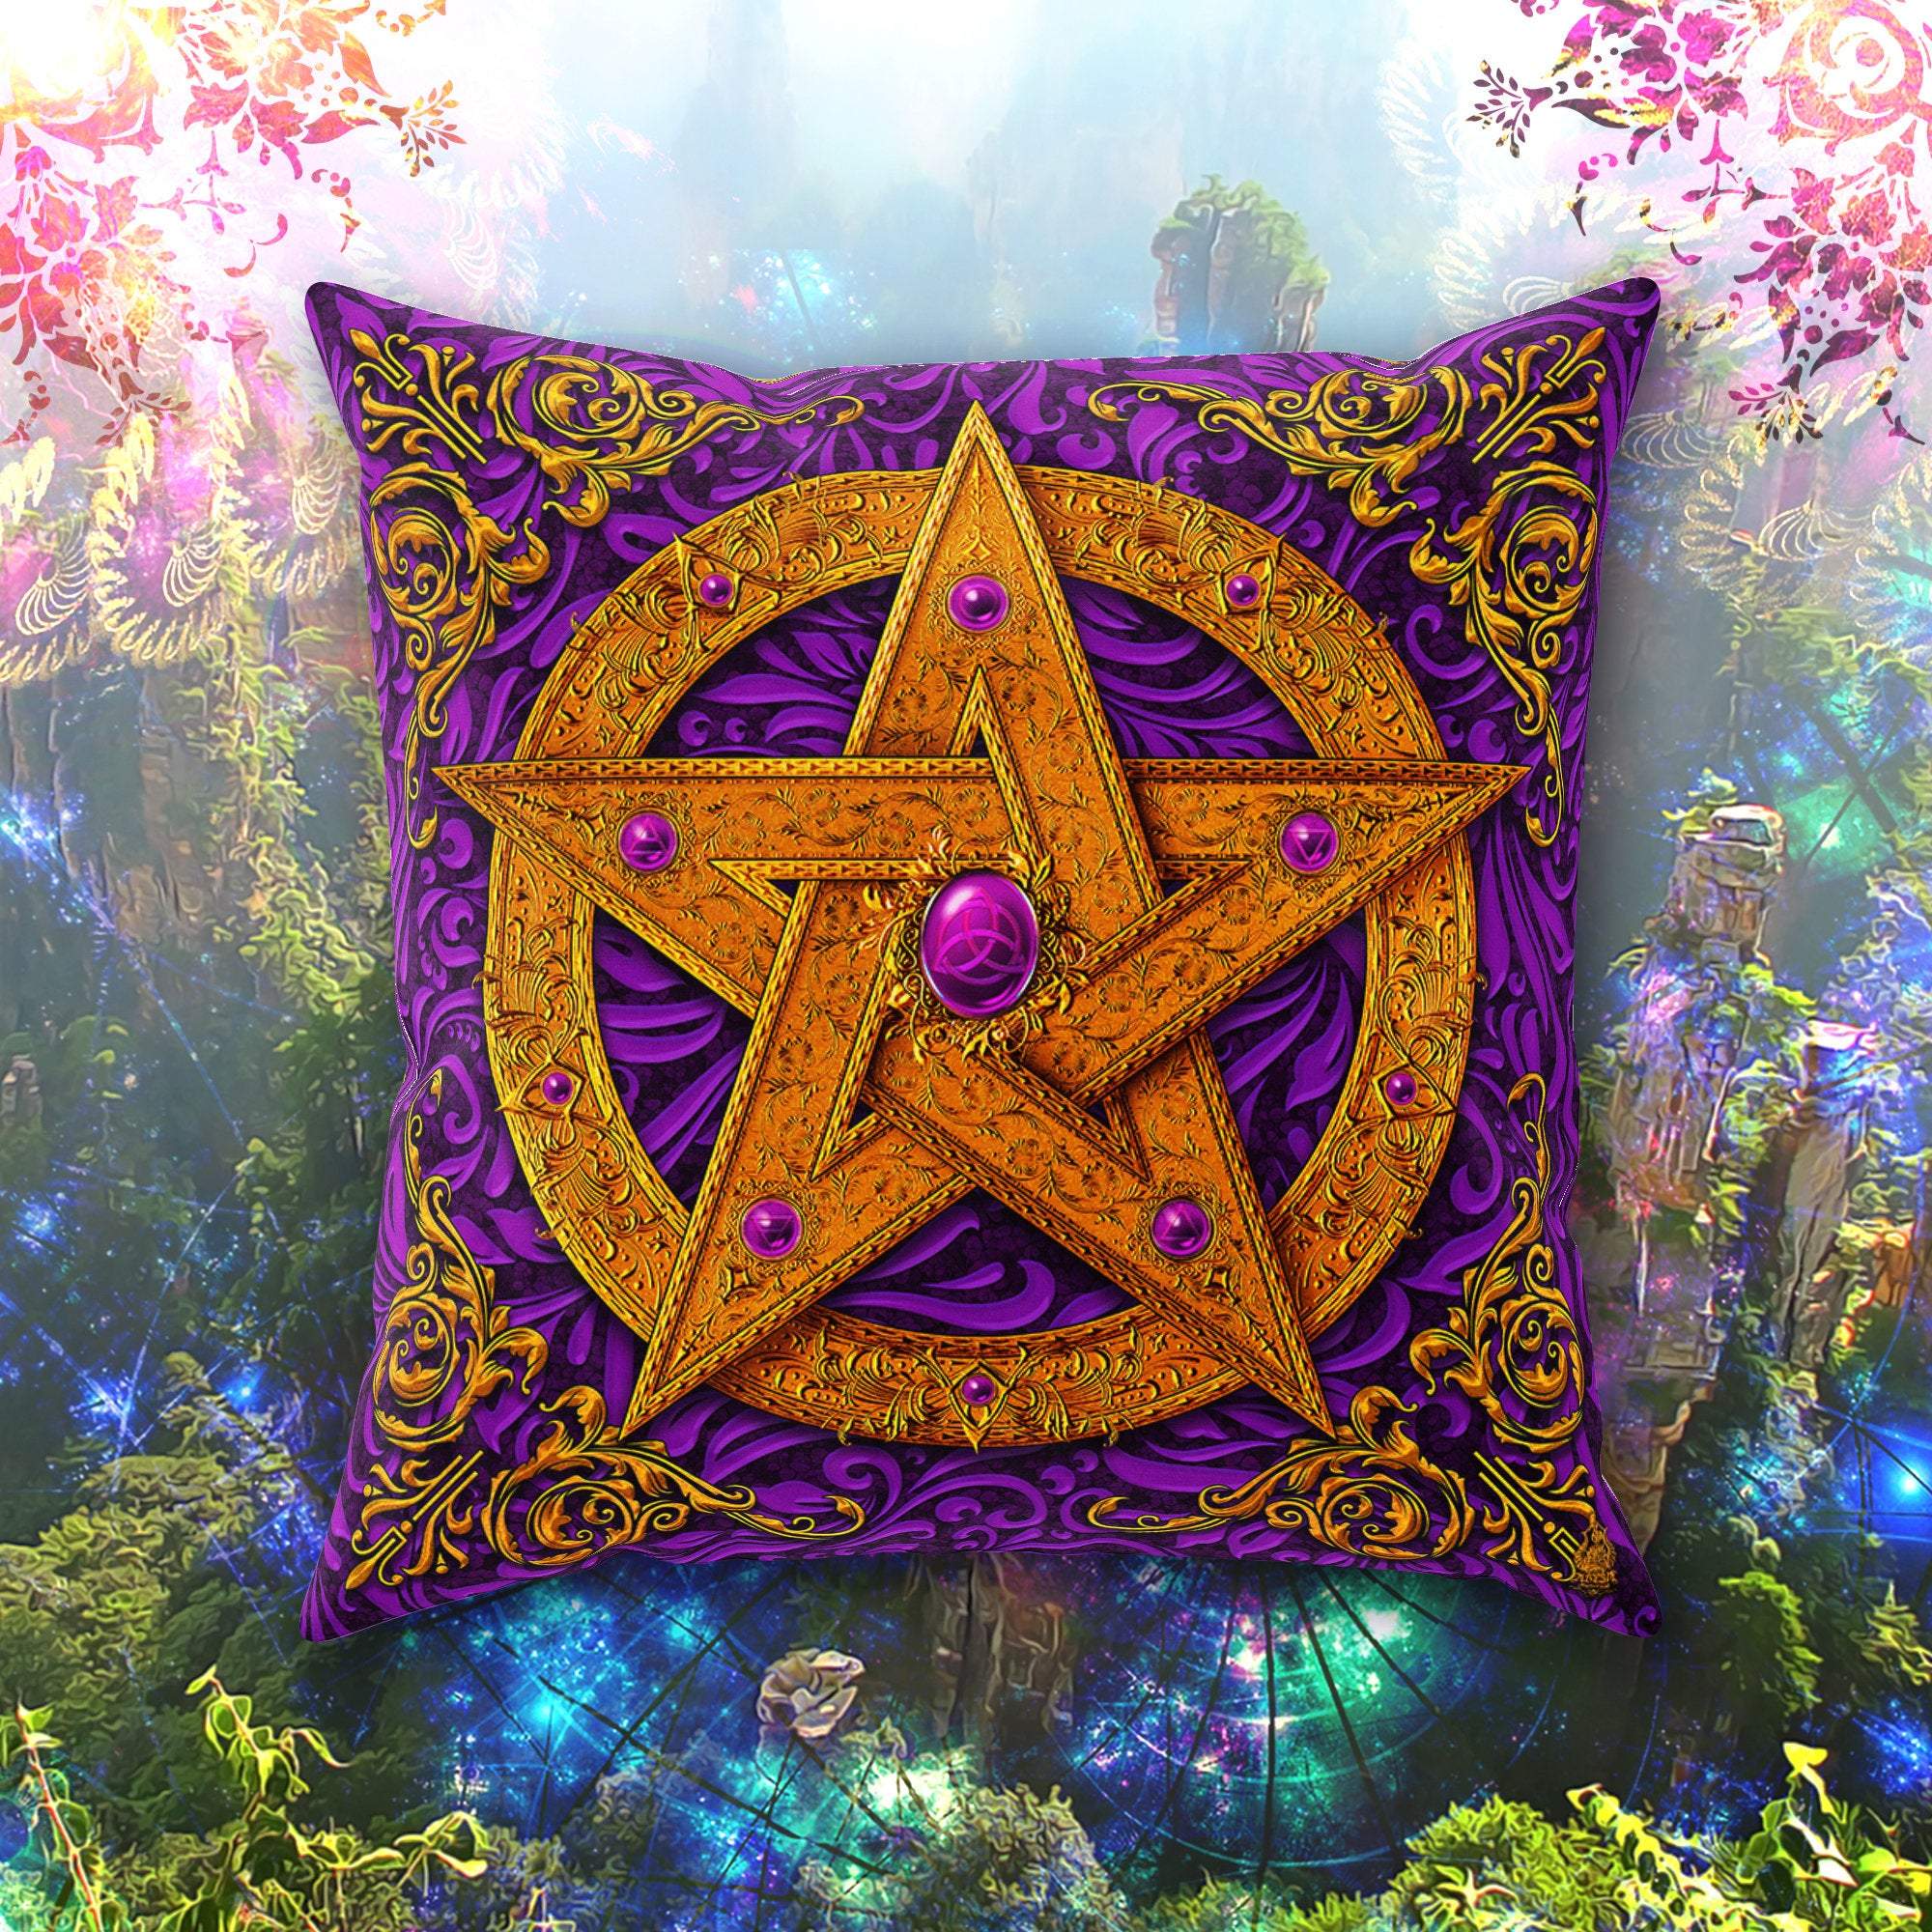 Pentacle Throw Pillow, Decorative Accent Cushion, Wicca, Witchy Room Decor, Pagan Art, Funky and Eclectic Home - Purple - Abysm Internal